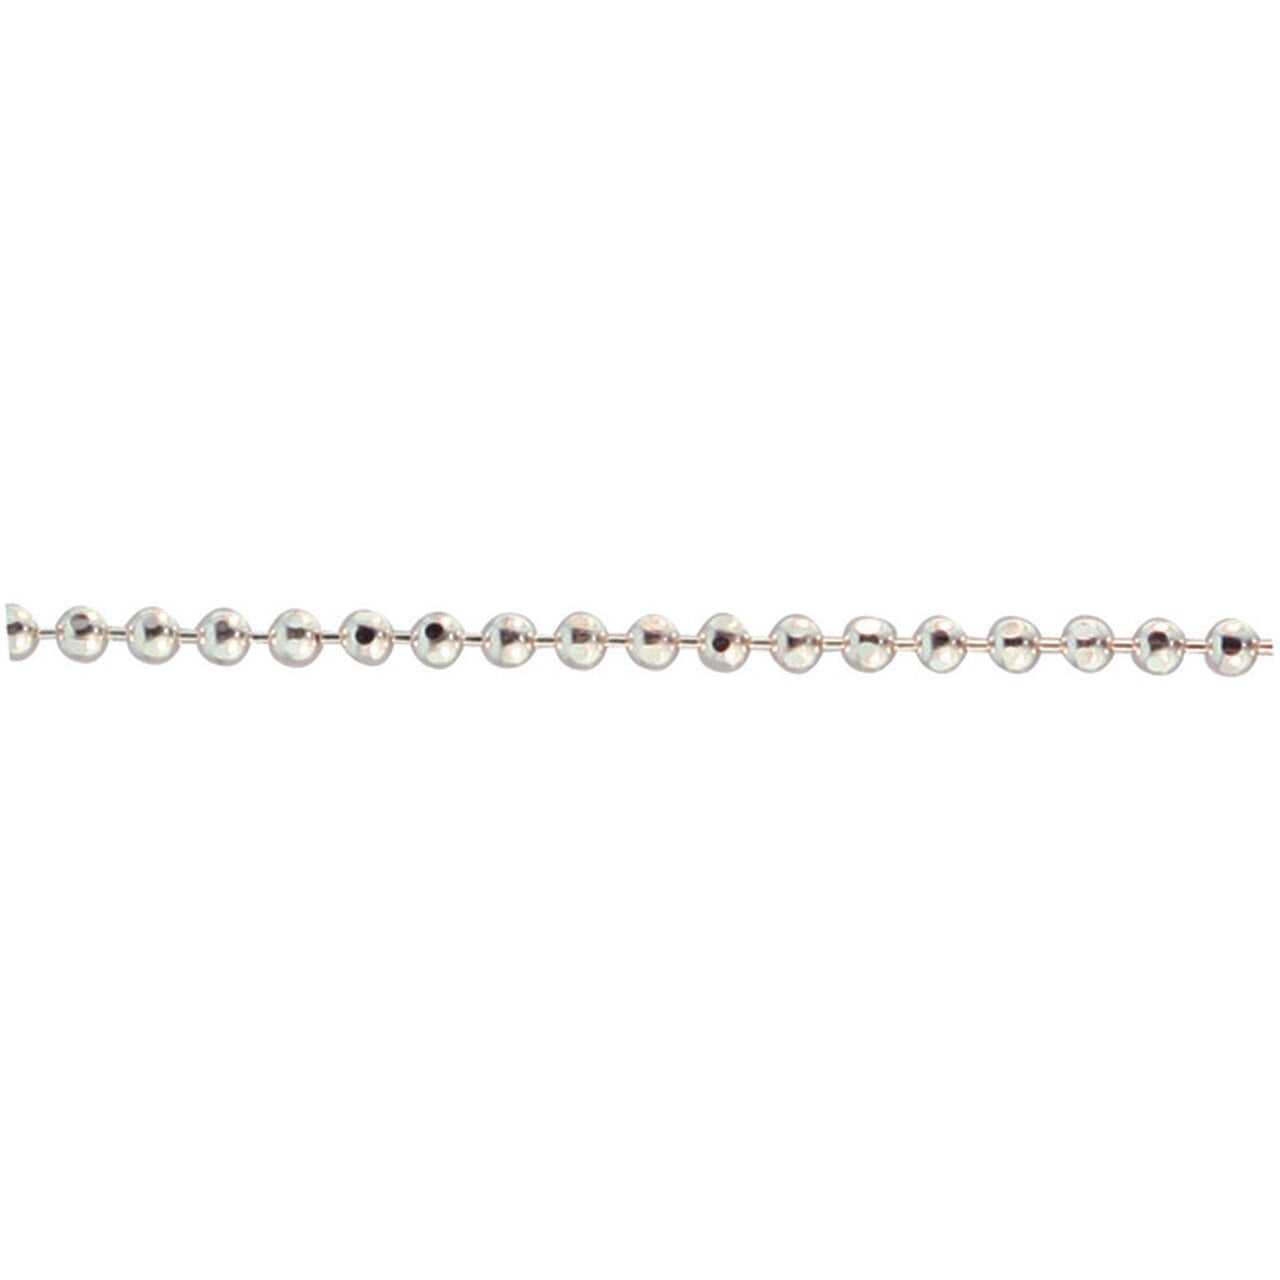 Tiny Sparkly Ball Chain 1.5mm - Silver